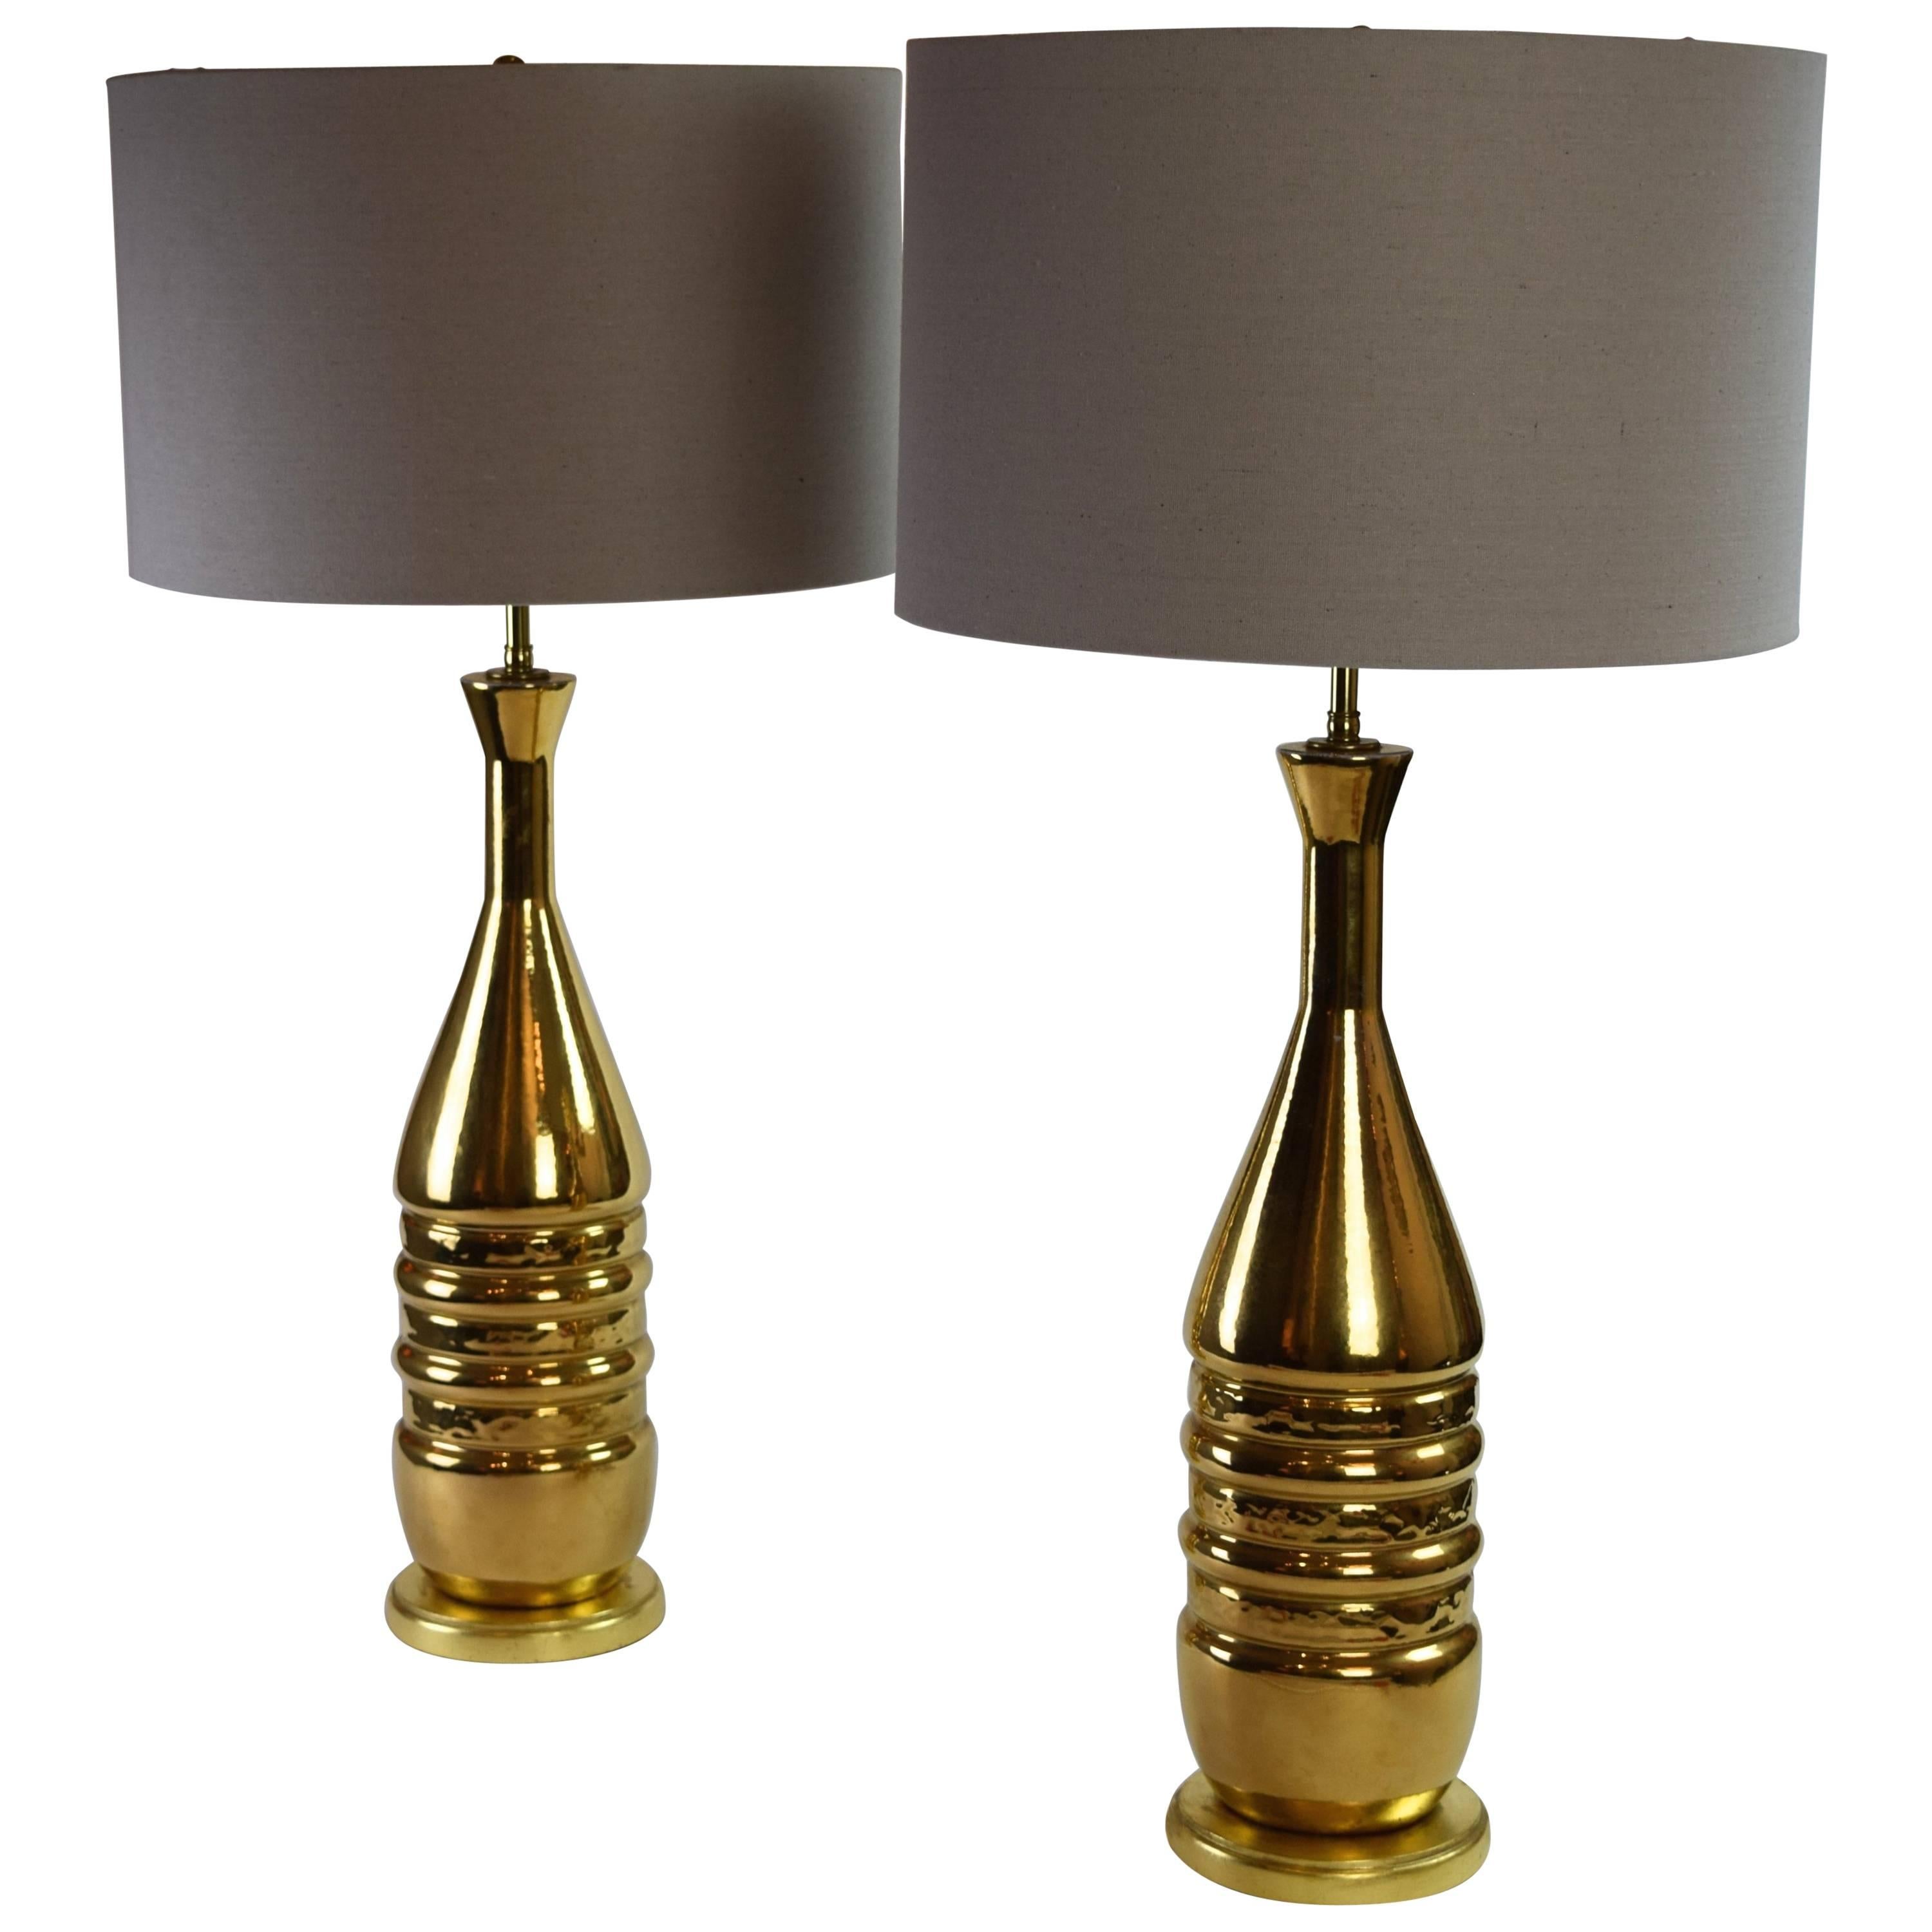 Pair of Tall Mid-Century Modern Gilt Ceramic Lamps For Sale